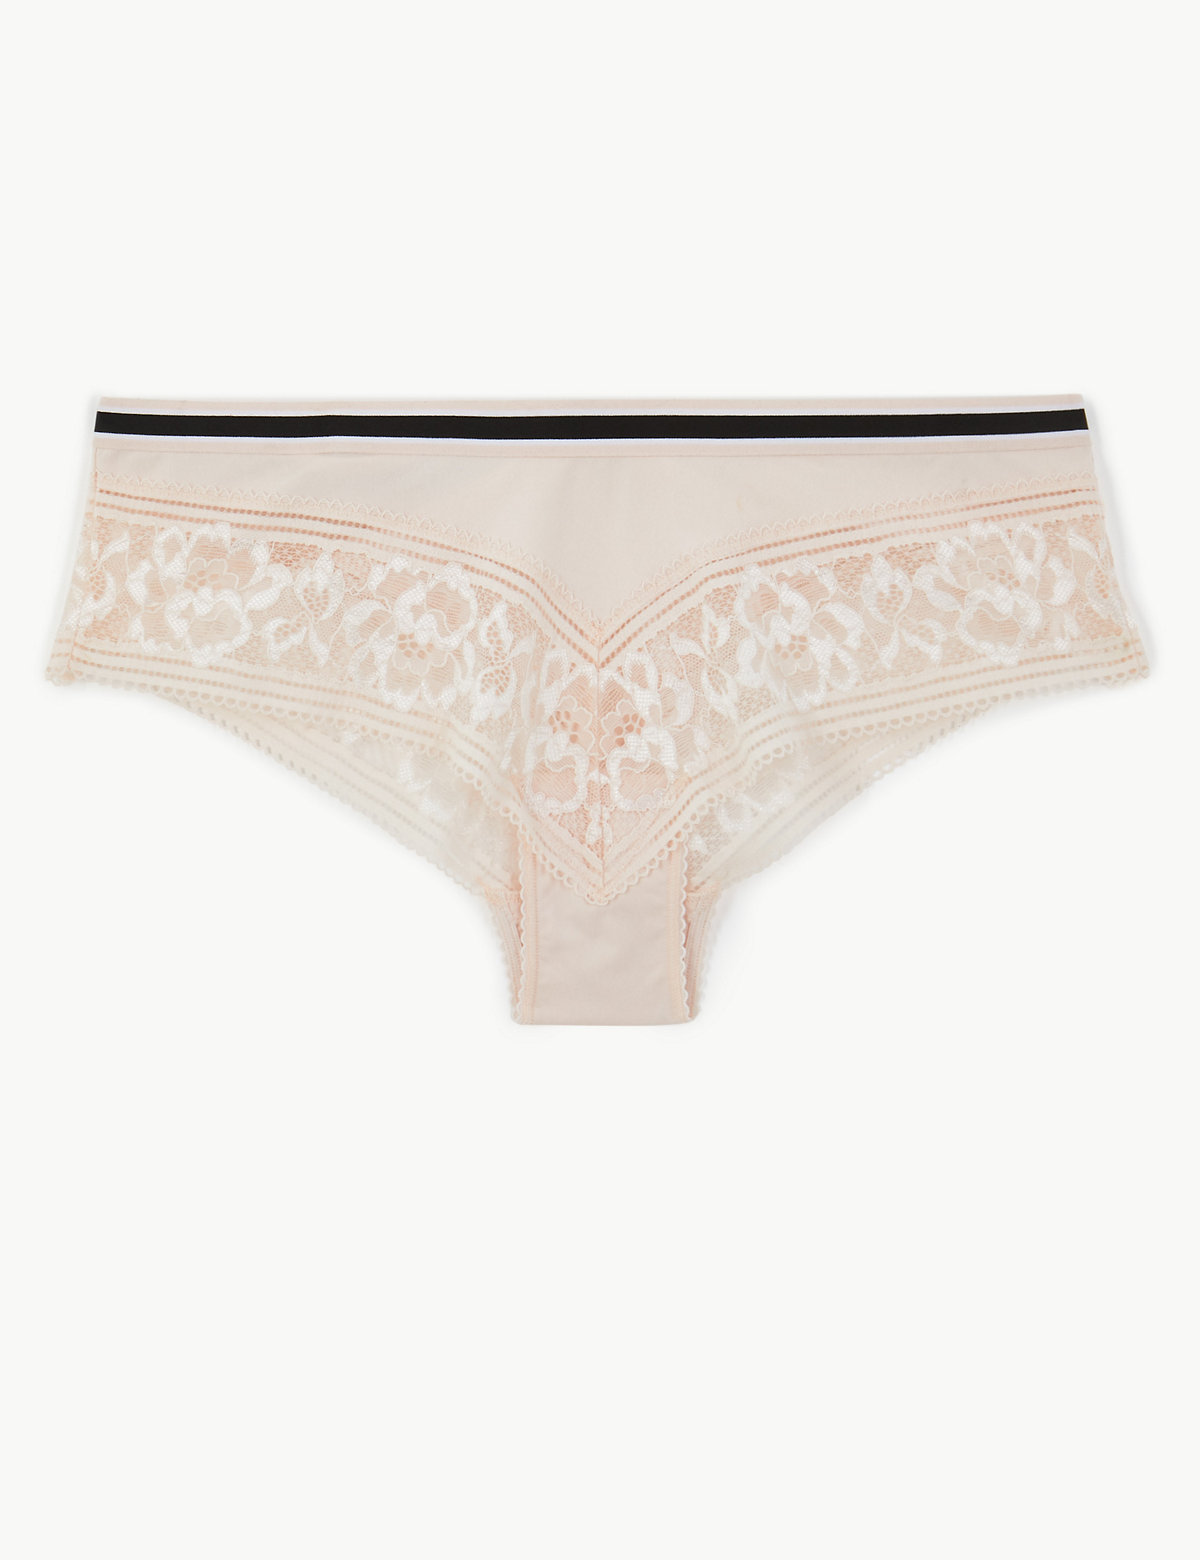 All Over Lace Sporty Trim Striped Brazilian Knickers